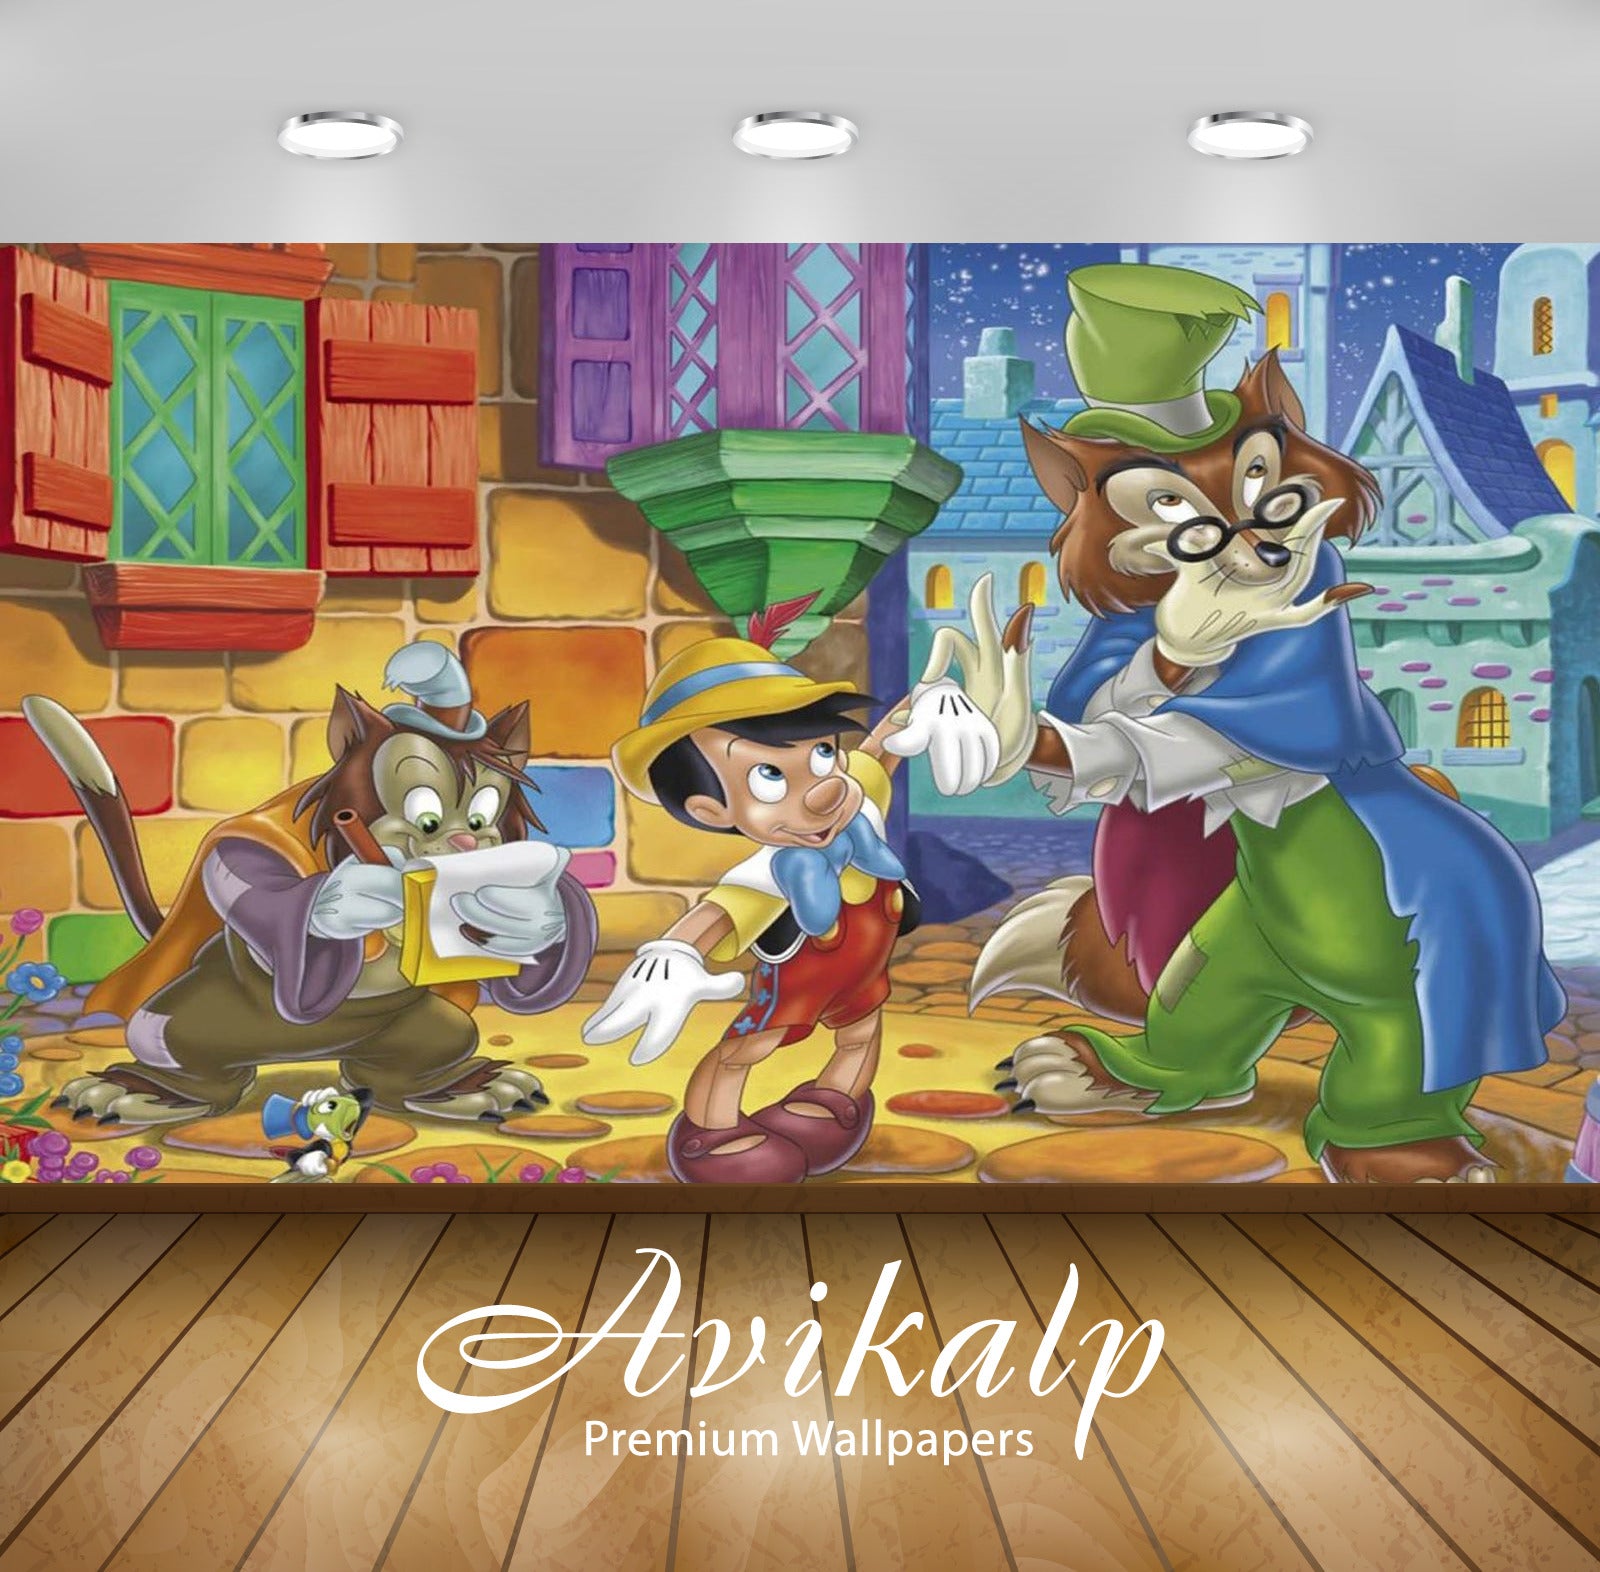 Avikalp Exclusive Awi2131 Pinocchio And Wolf Gideon Walt Disney  Full HD Wallpapers for Living room,